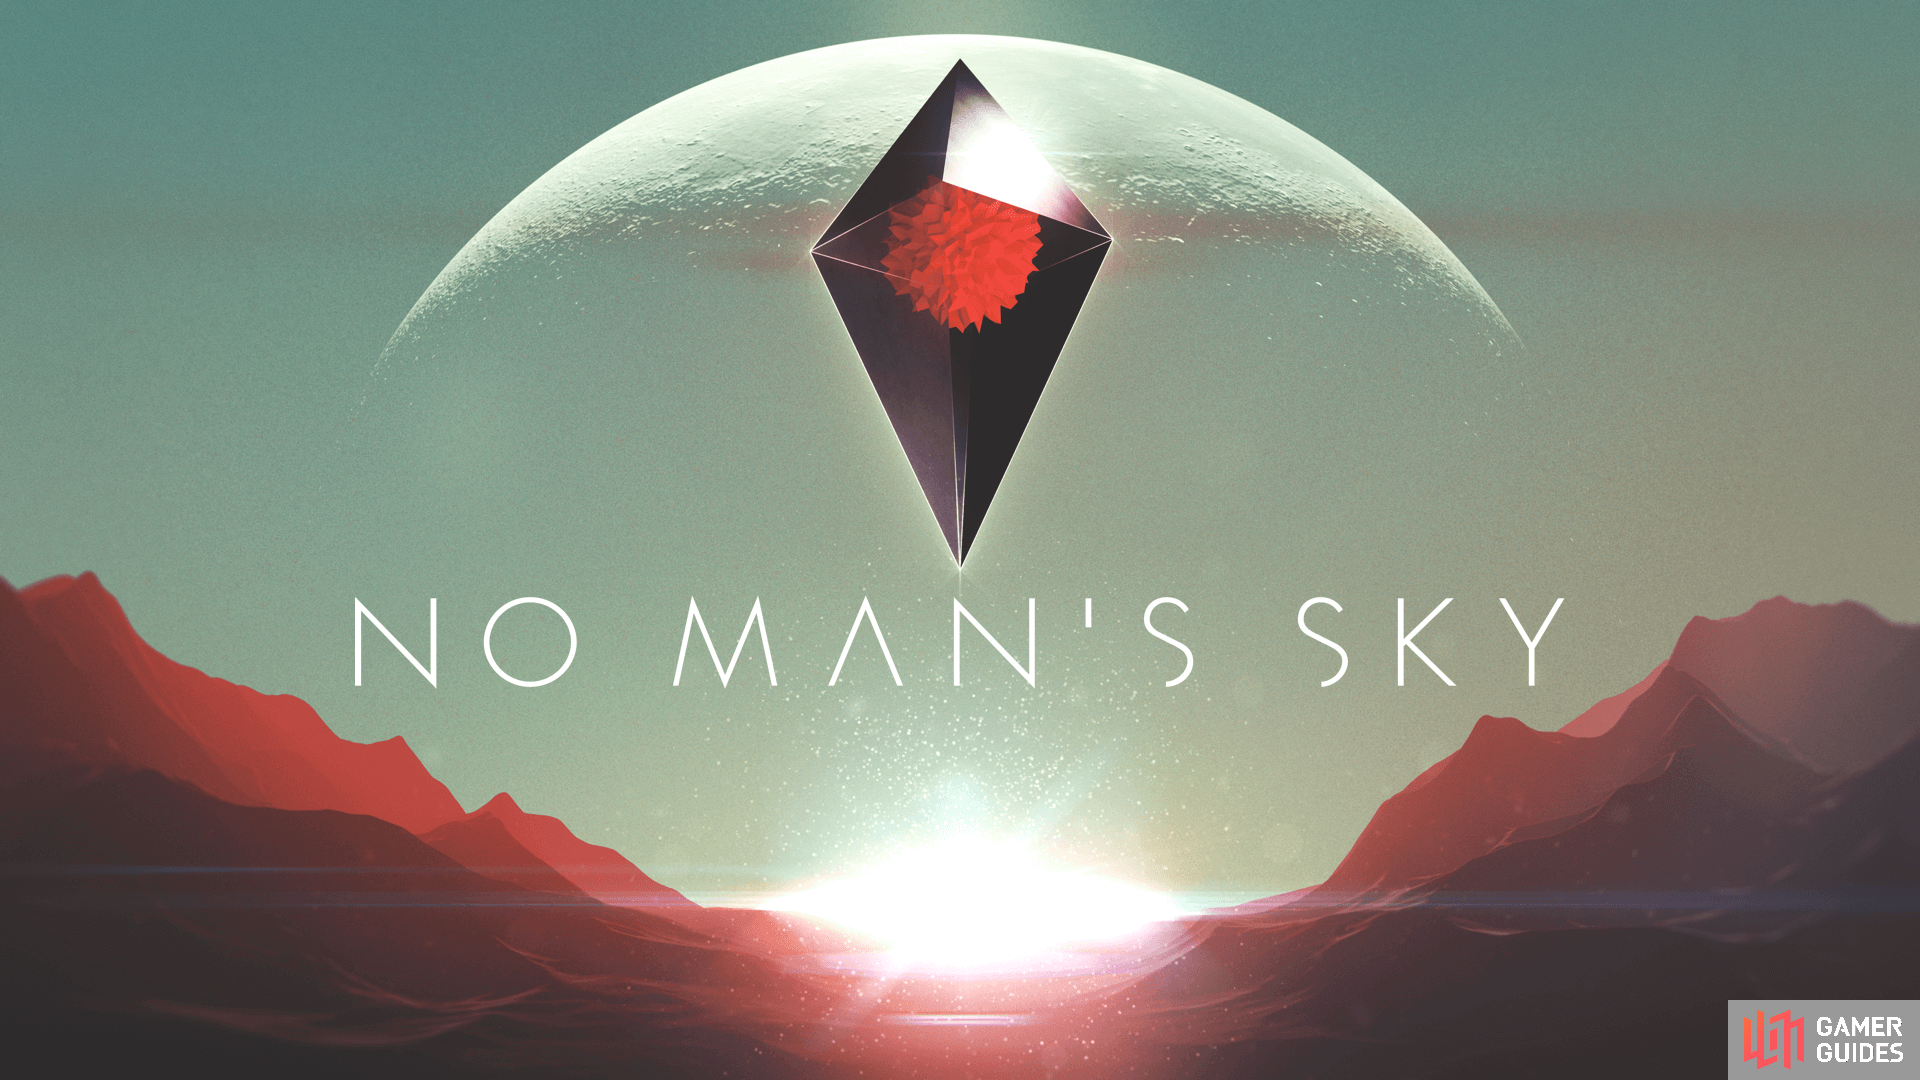 Image credit of Hello Games.